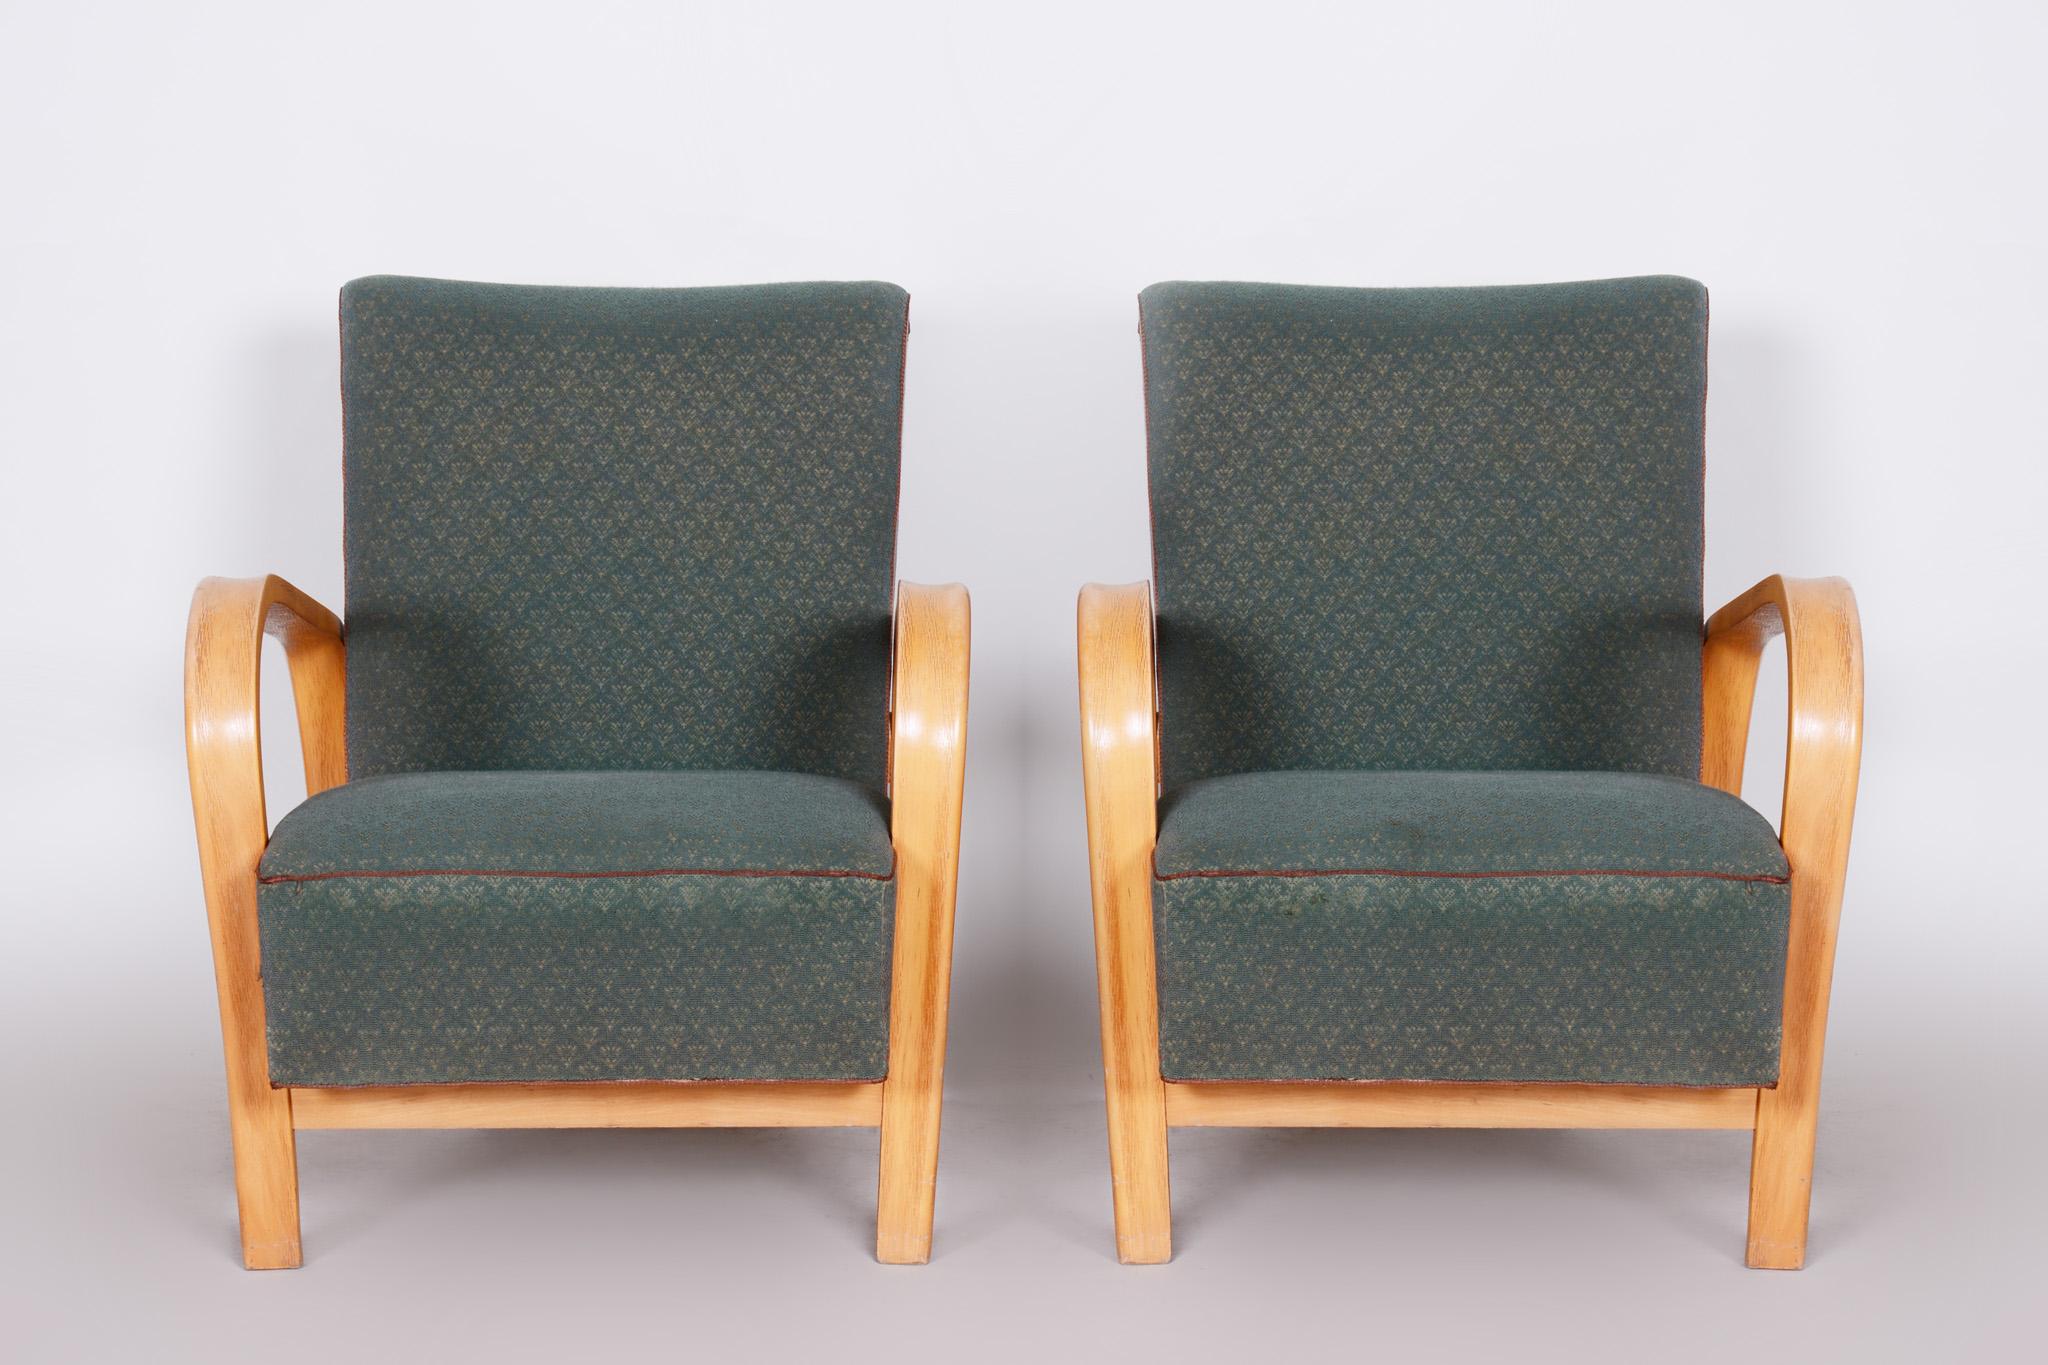 Pair of Mid Century Armchairs Made in Czechia 1930s, Collaboration with Halabala In Good Condition For Sale In Horomerice, CZ